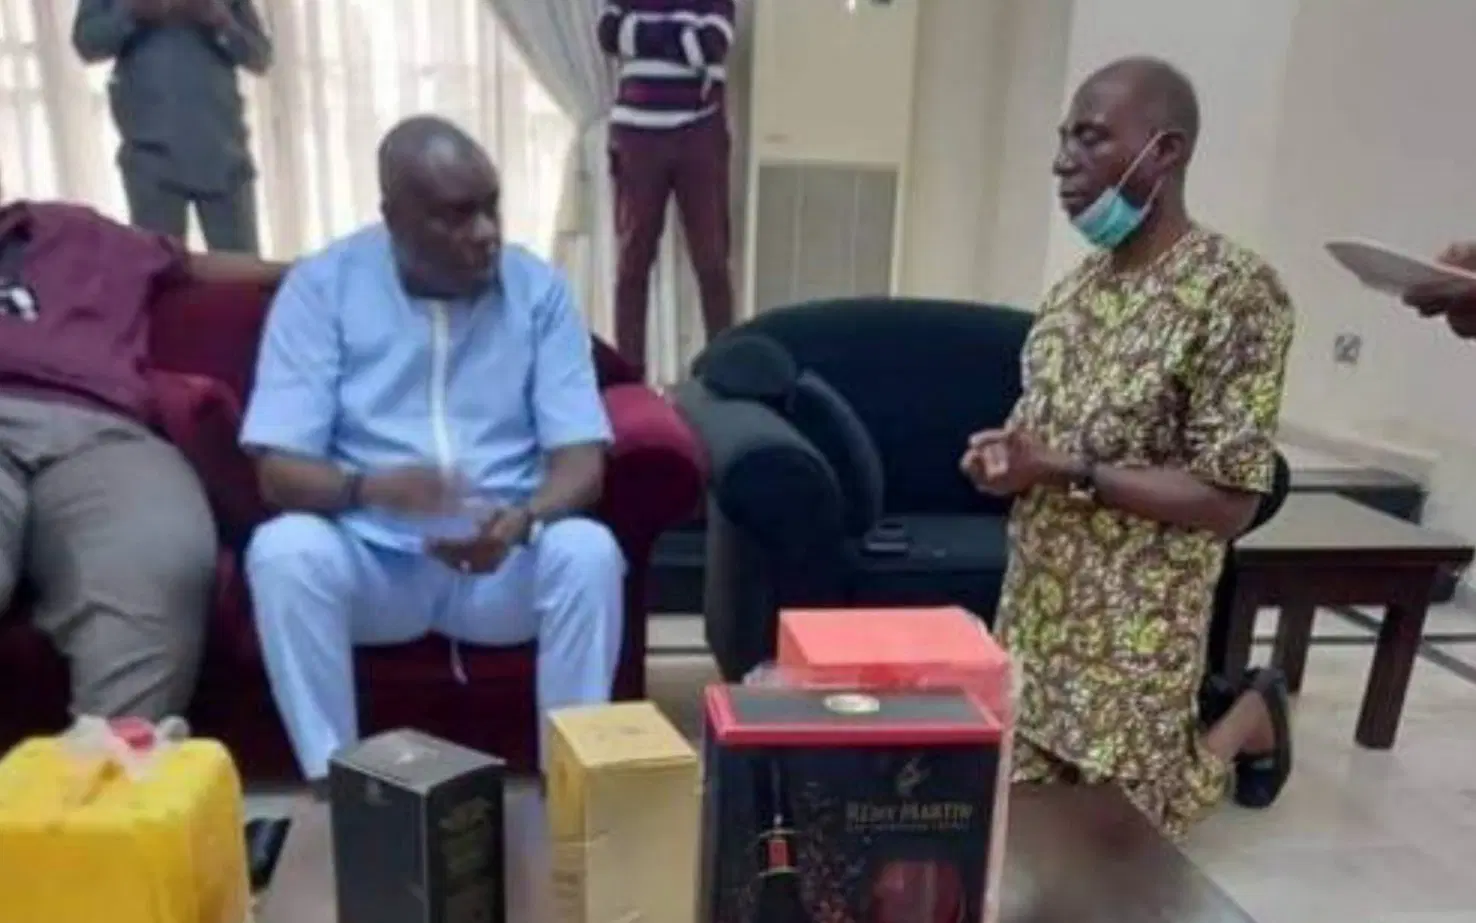 The Reason Five Times Nigerian Lawmaker Seen Kneeling Before The Ex-Convict James Ibori Revealed